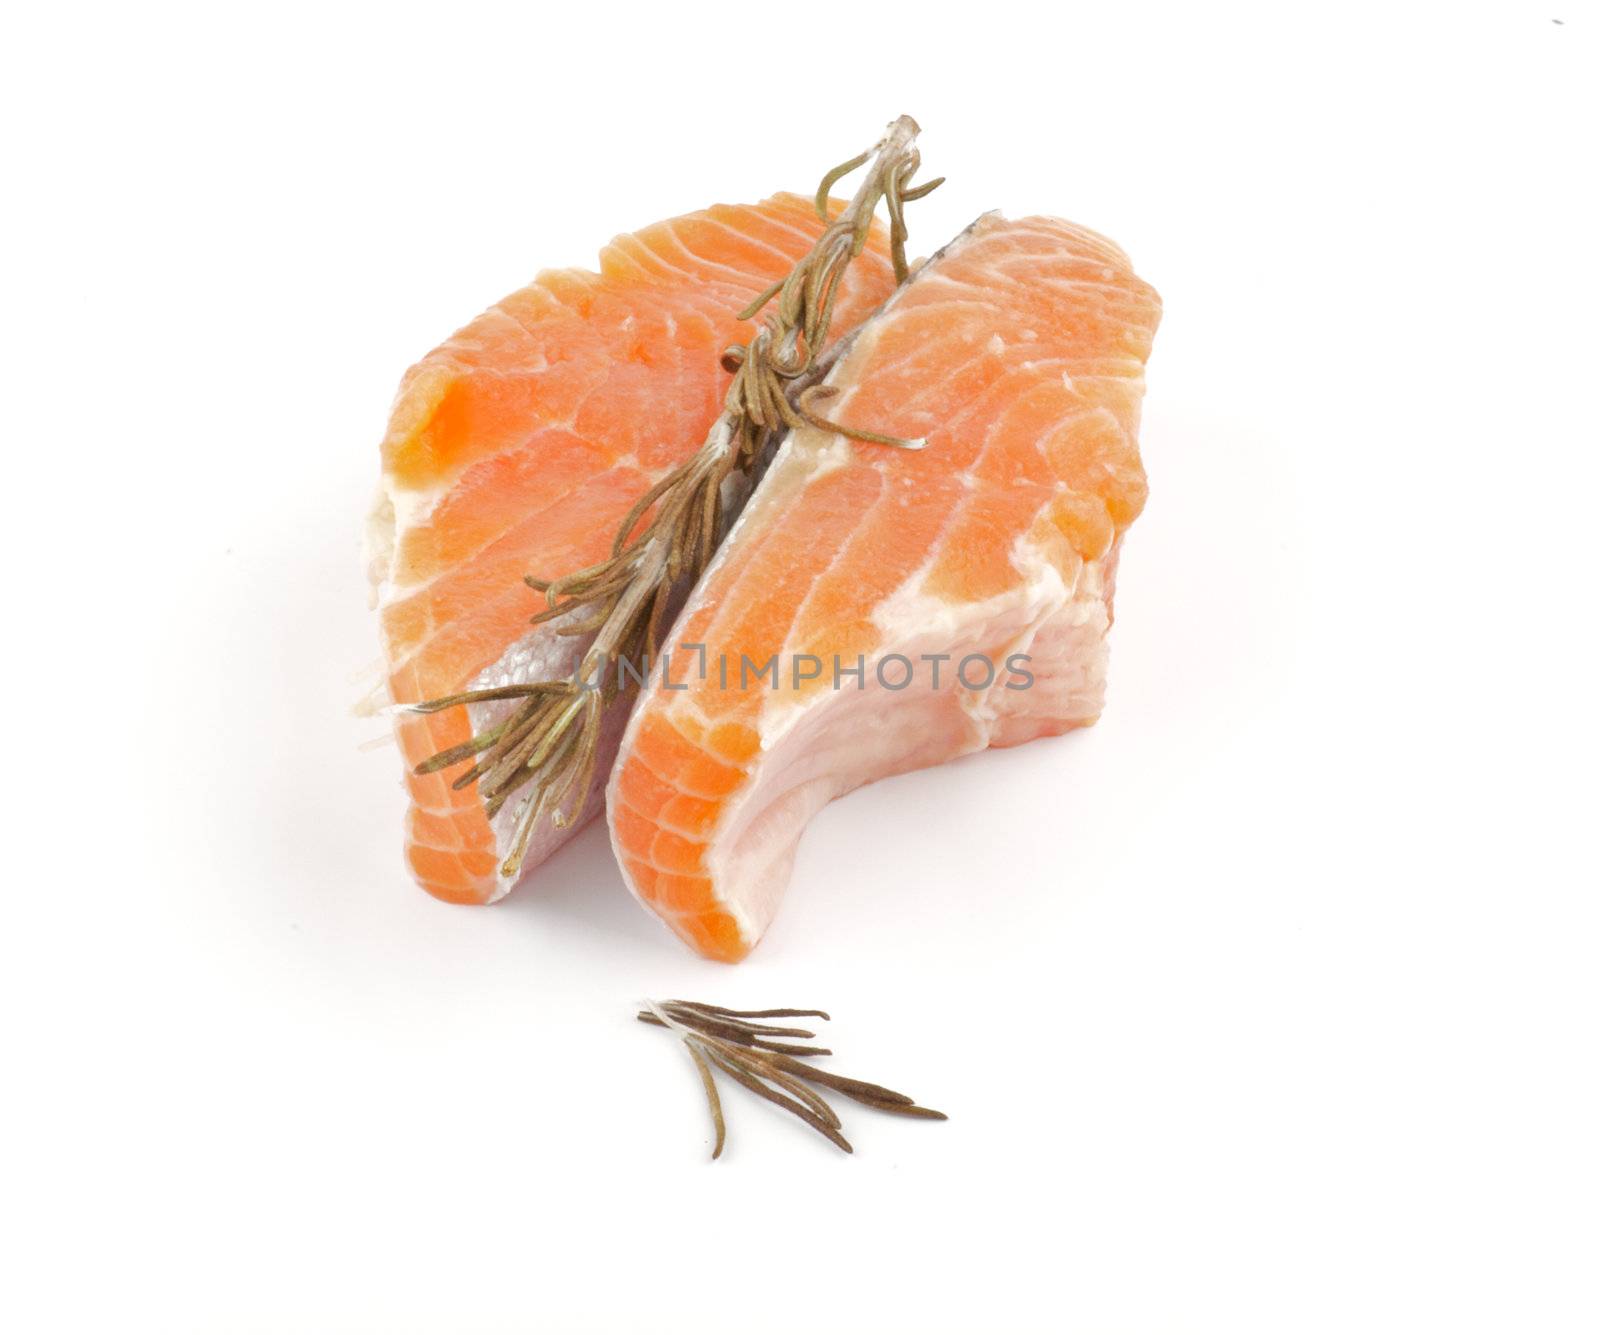 Raw Salmon Fish Fillet with rosemary isolated on white background